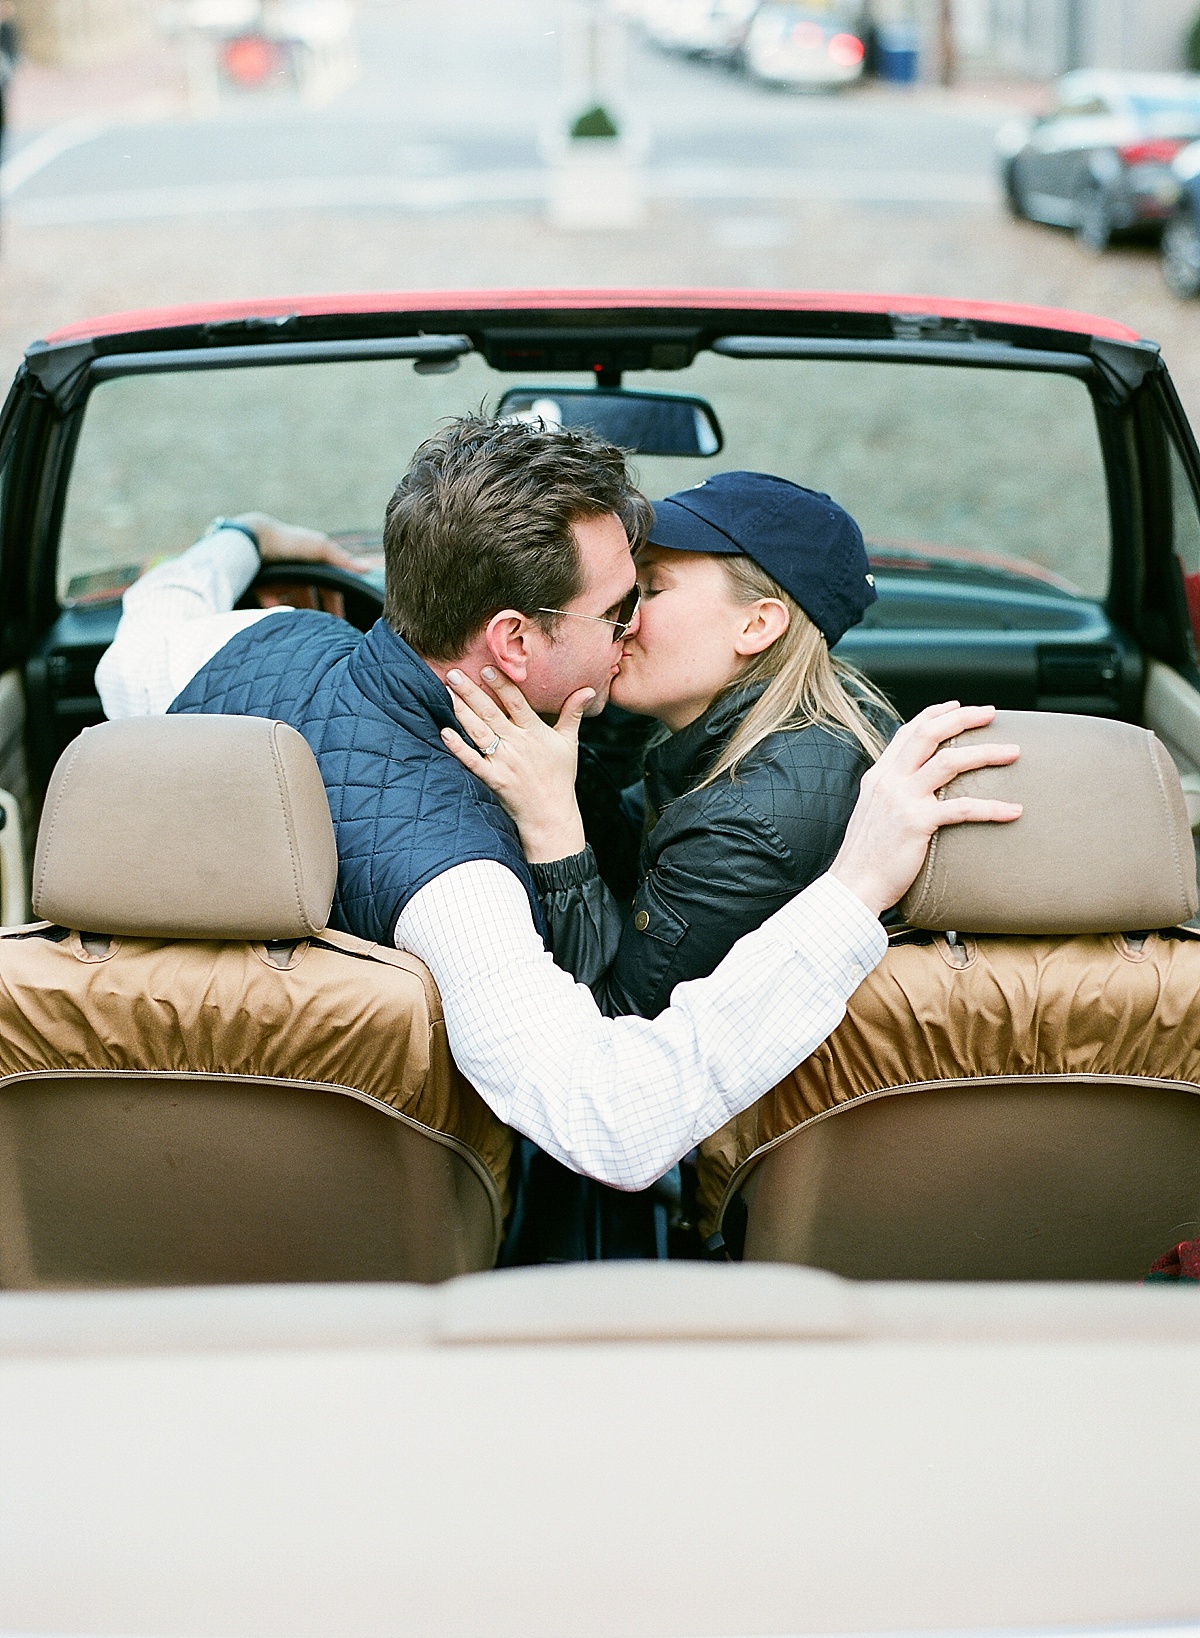 Vintage BMW anniversary session in Old Town Alexandria | fine art film photographer Abby Grace